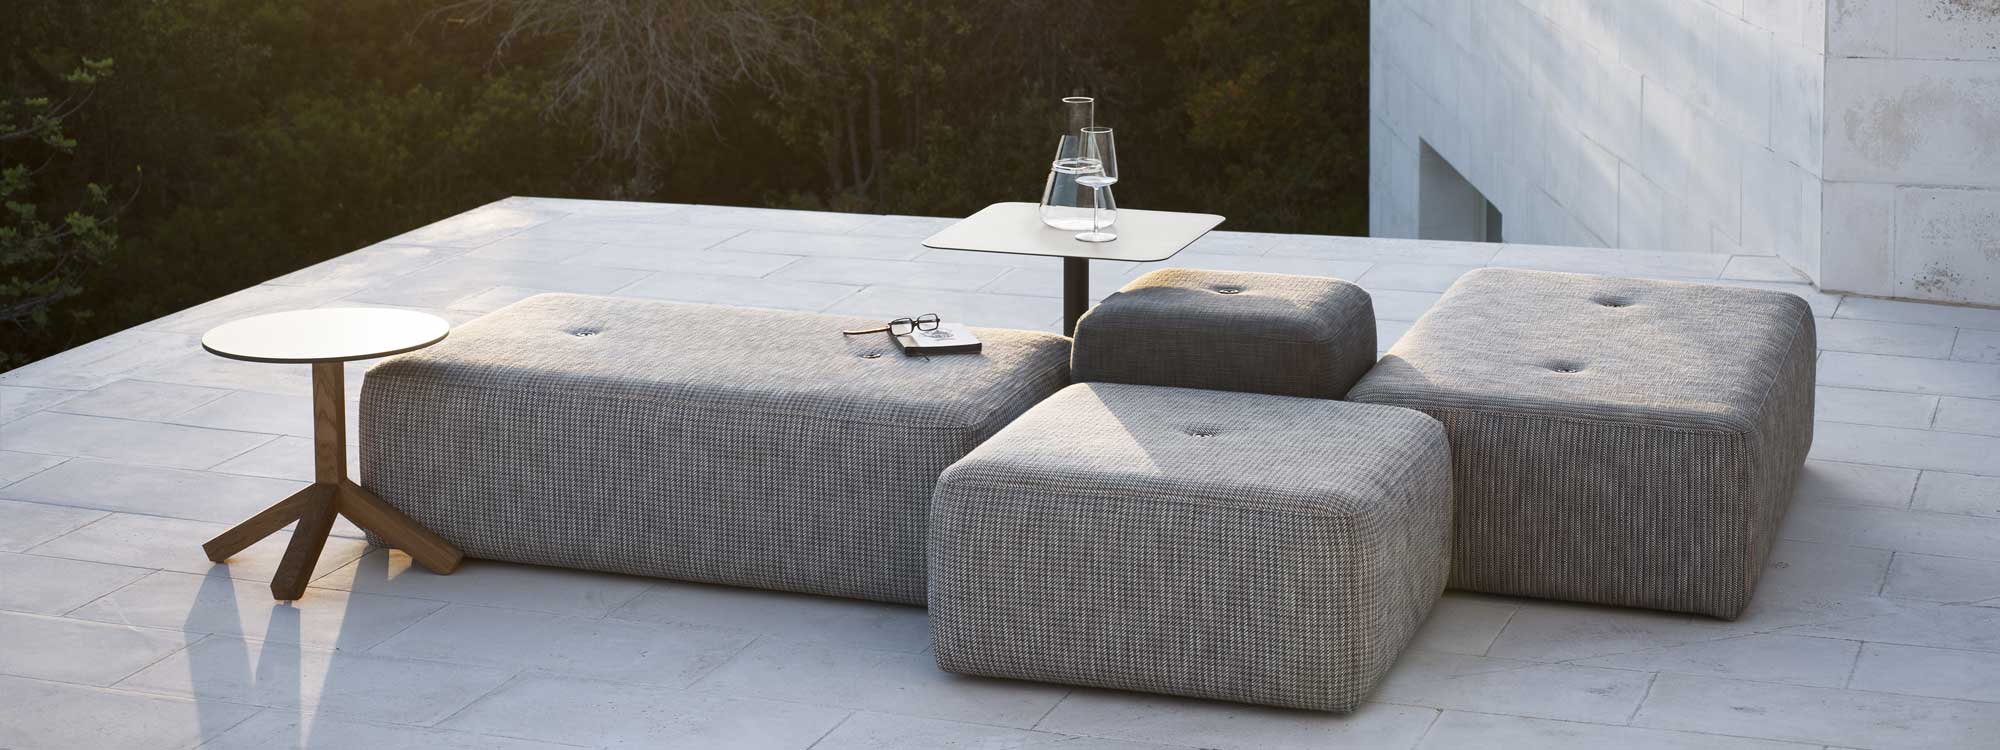 Image of configuration of rectangular and square Double outdoor poufs, together with Bernardo and Root modern side tables by RODA